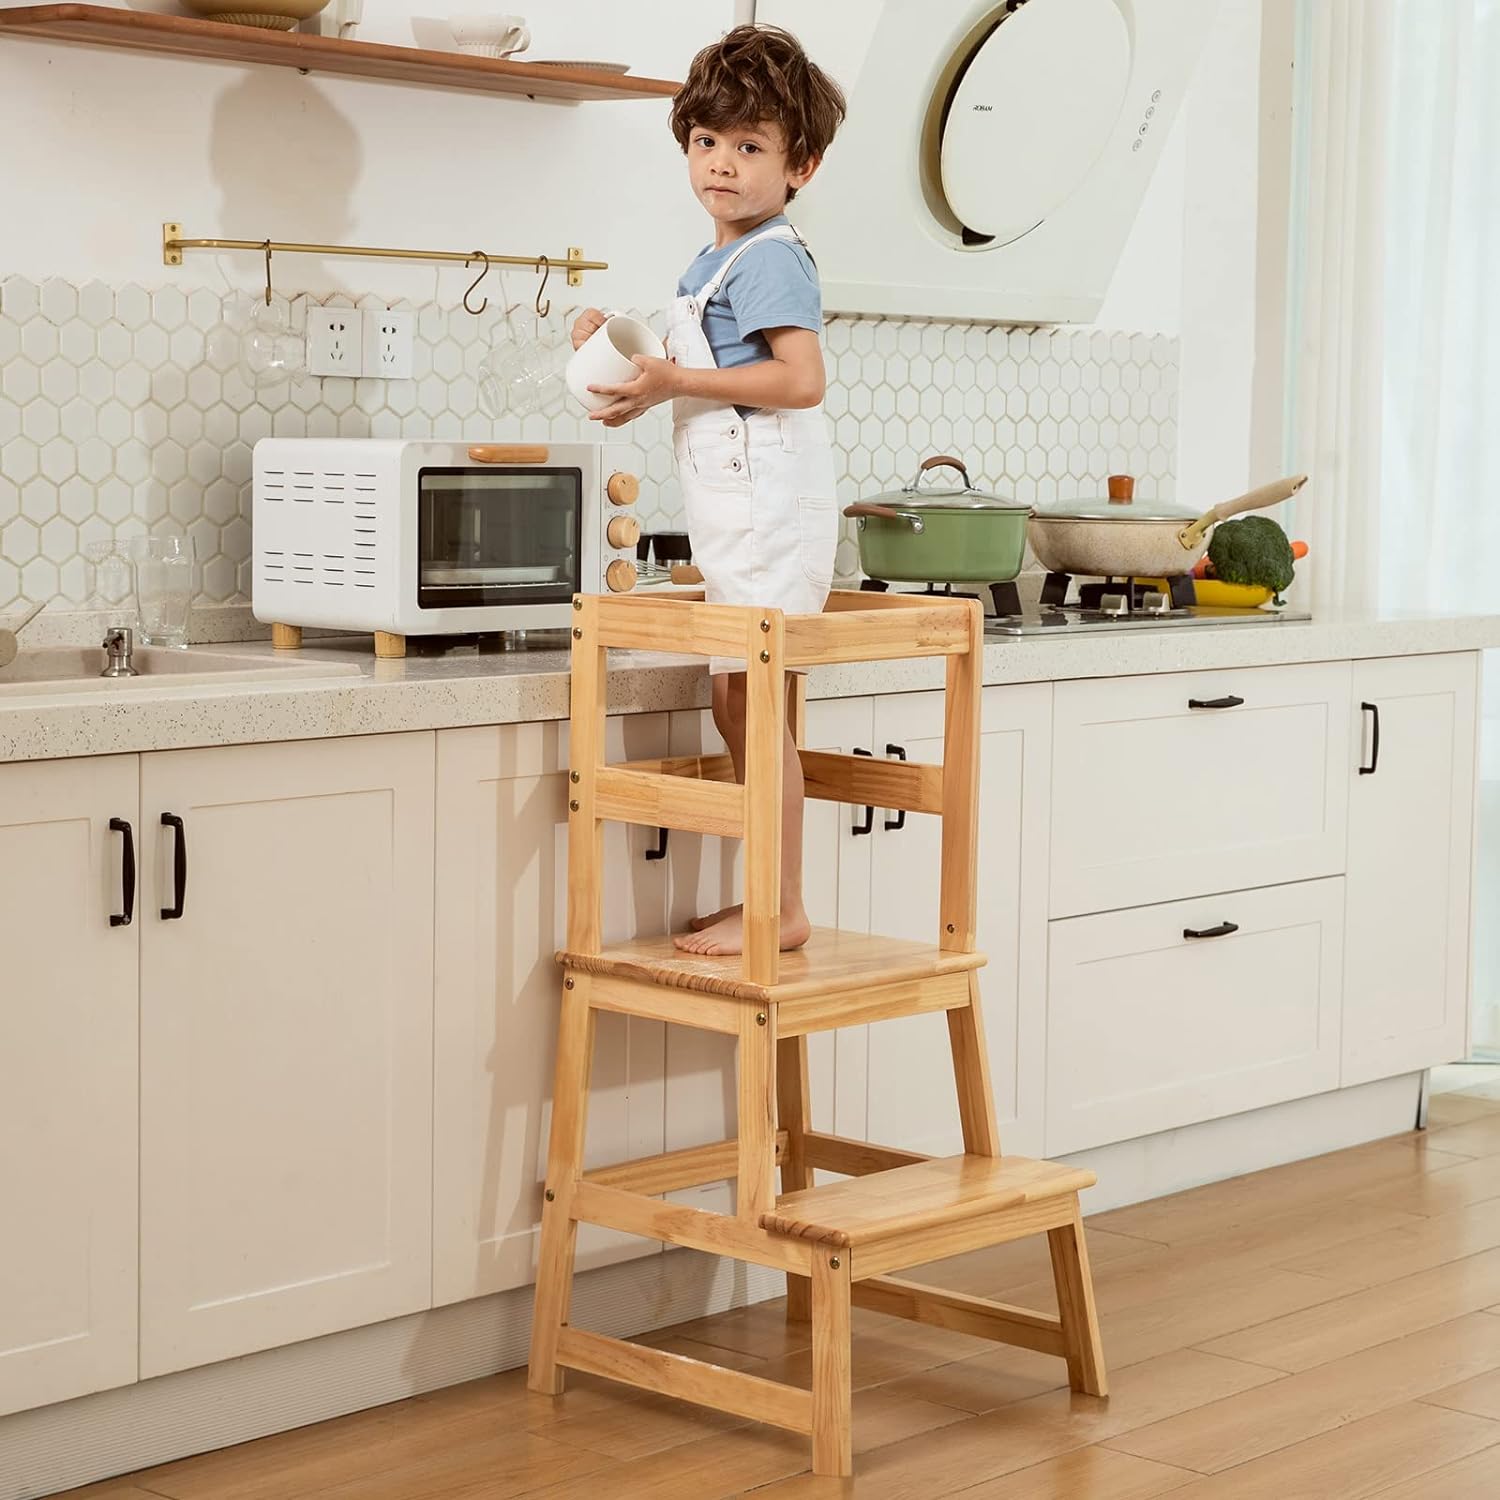 Best Learning Tower or Kitchen Helper Stools UK - The Ultimate